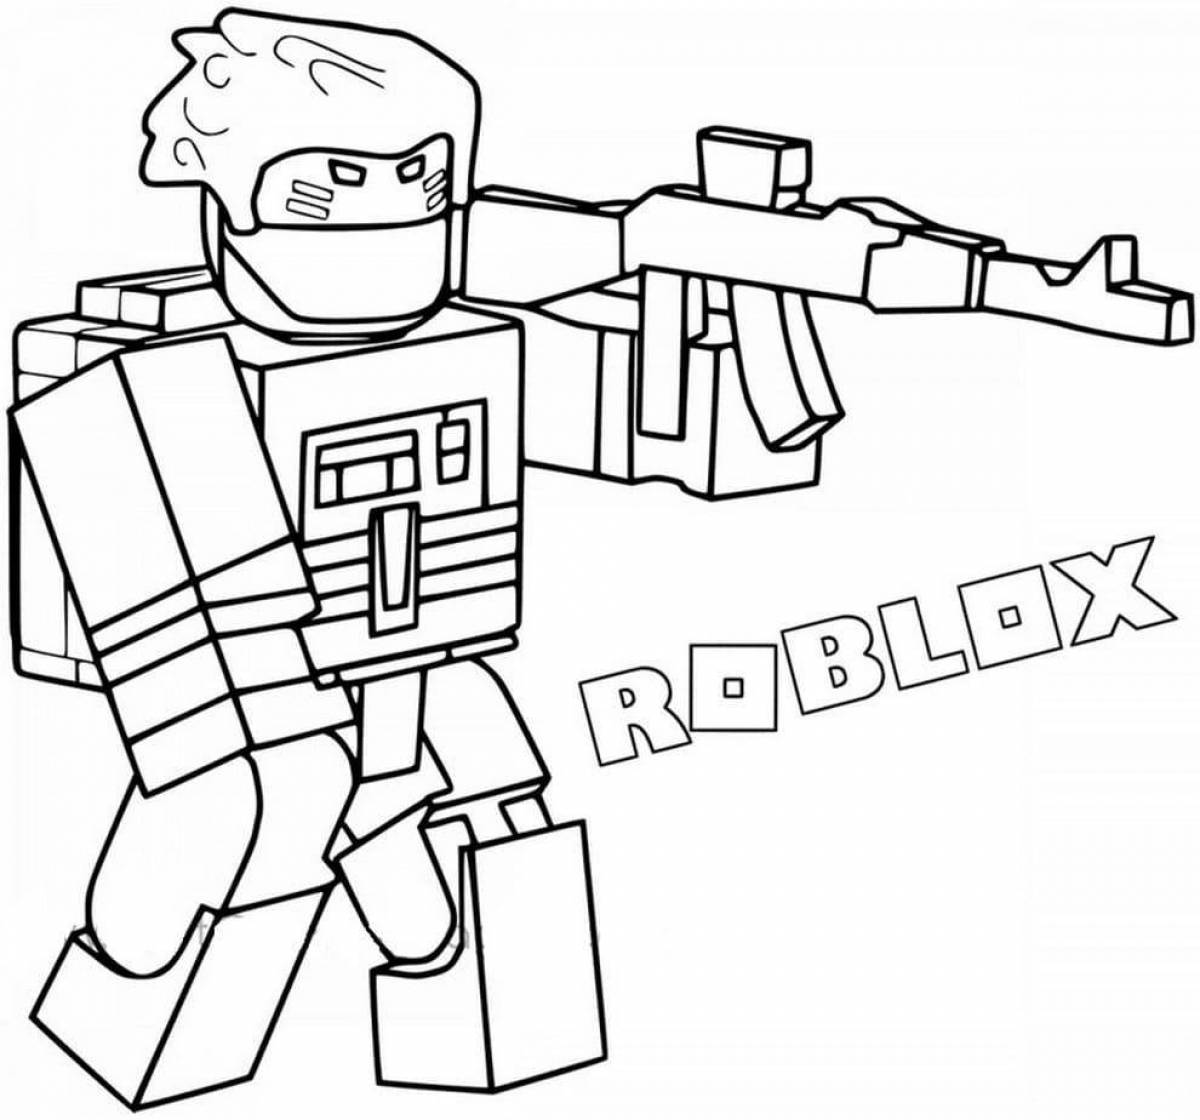 Roblox queen colorful coloring page